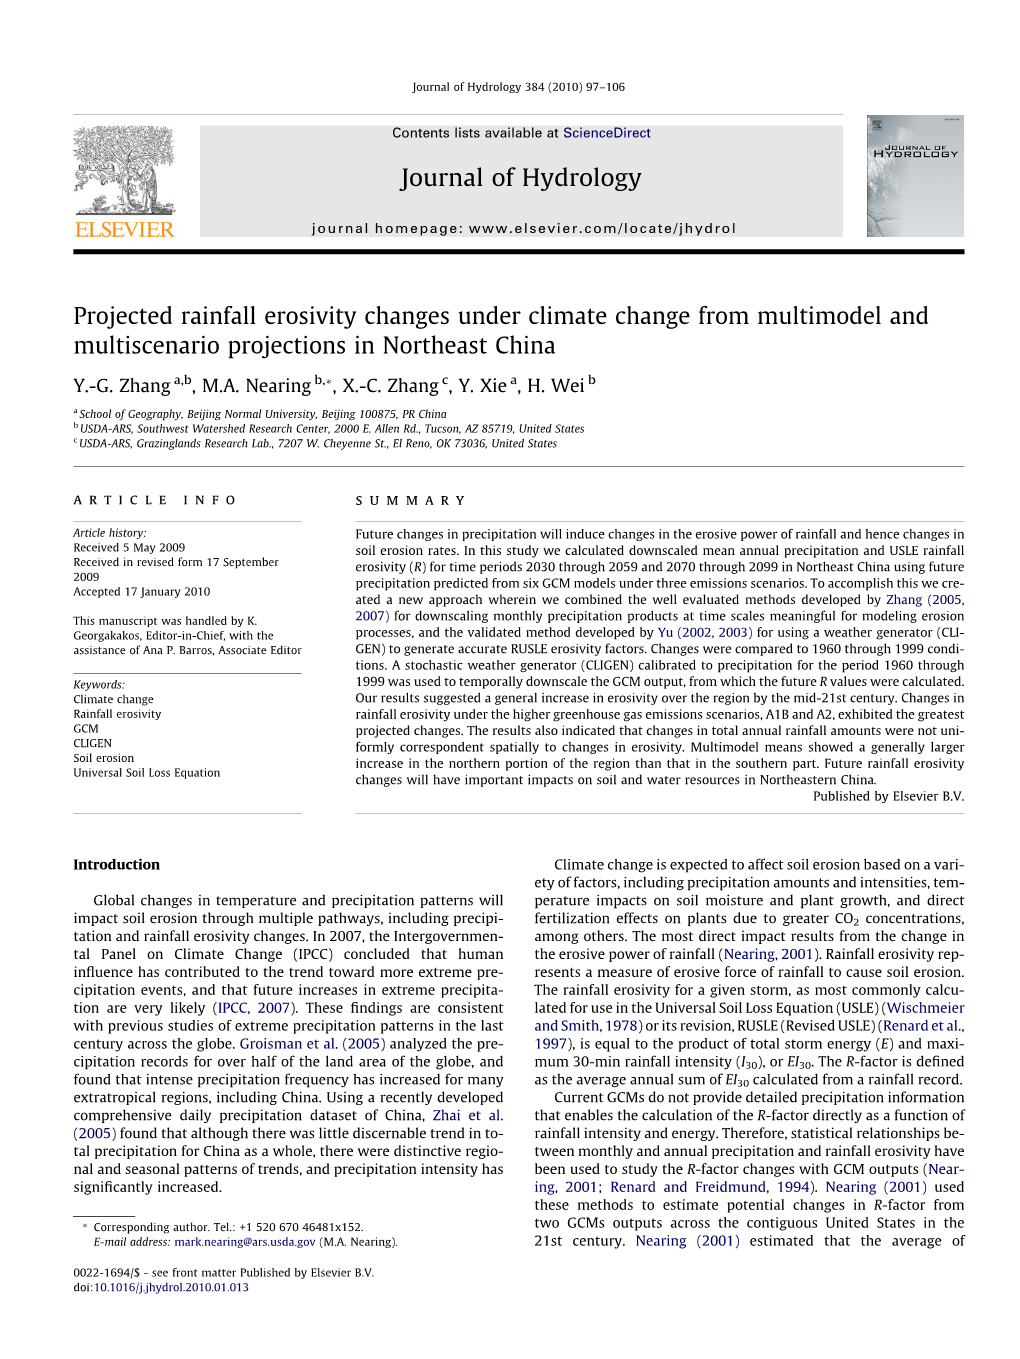 Projected Rainfall Erosivity Changes Under Climate Change from Multimodel and Multiscenario Projections in Northeast China